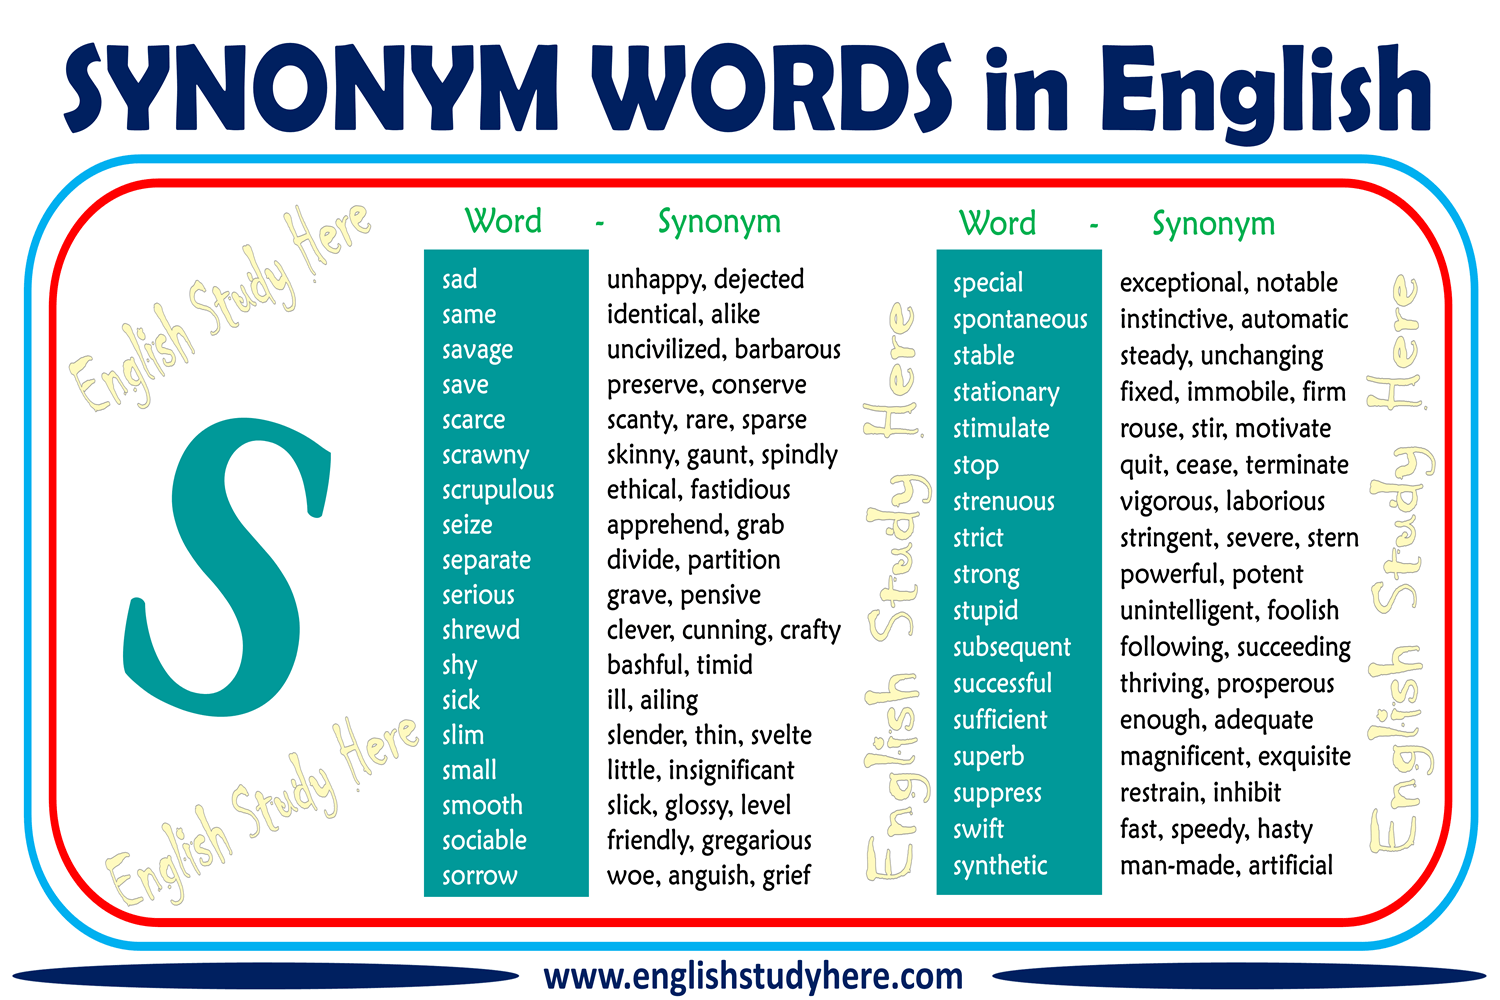 Synonym Words With S in English - English Study Here